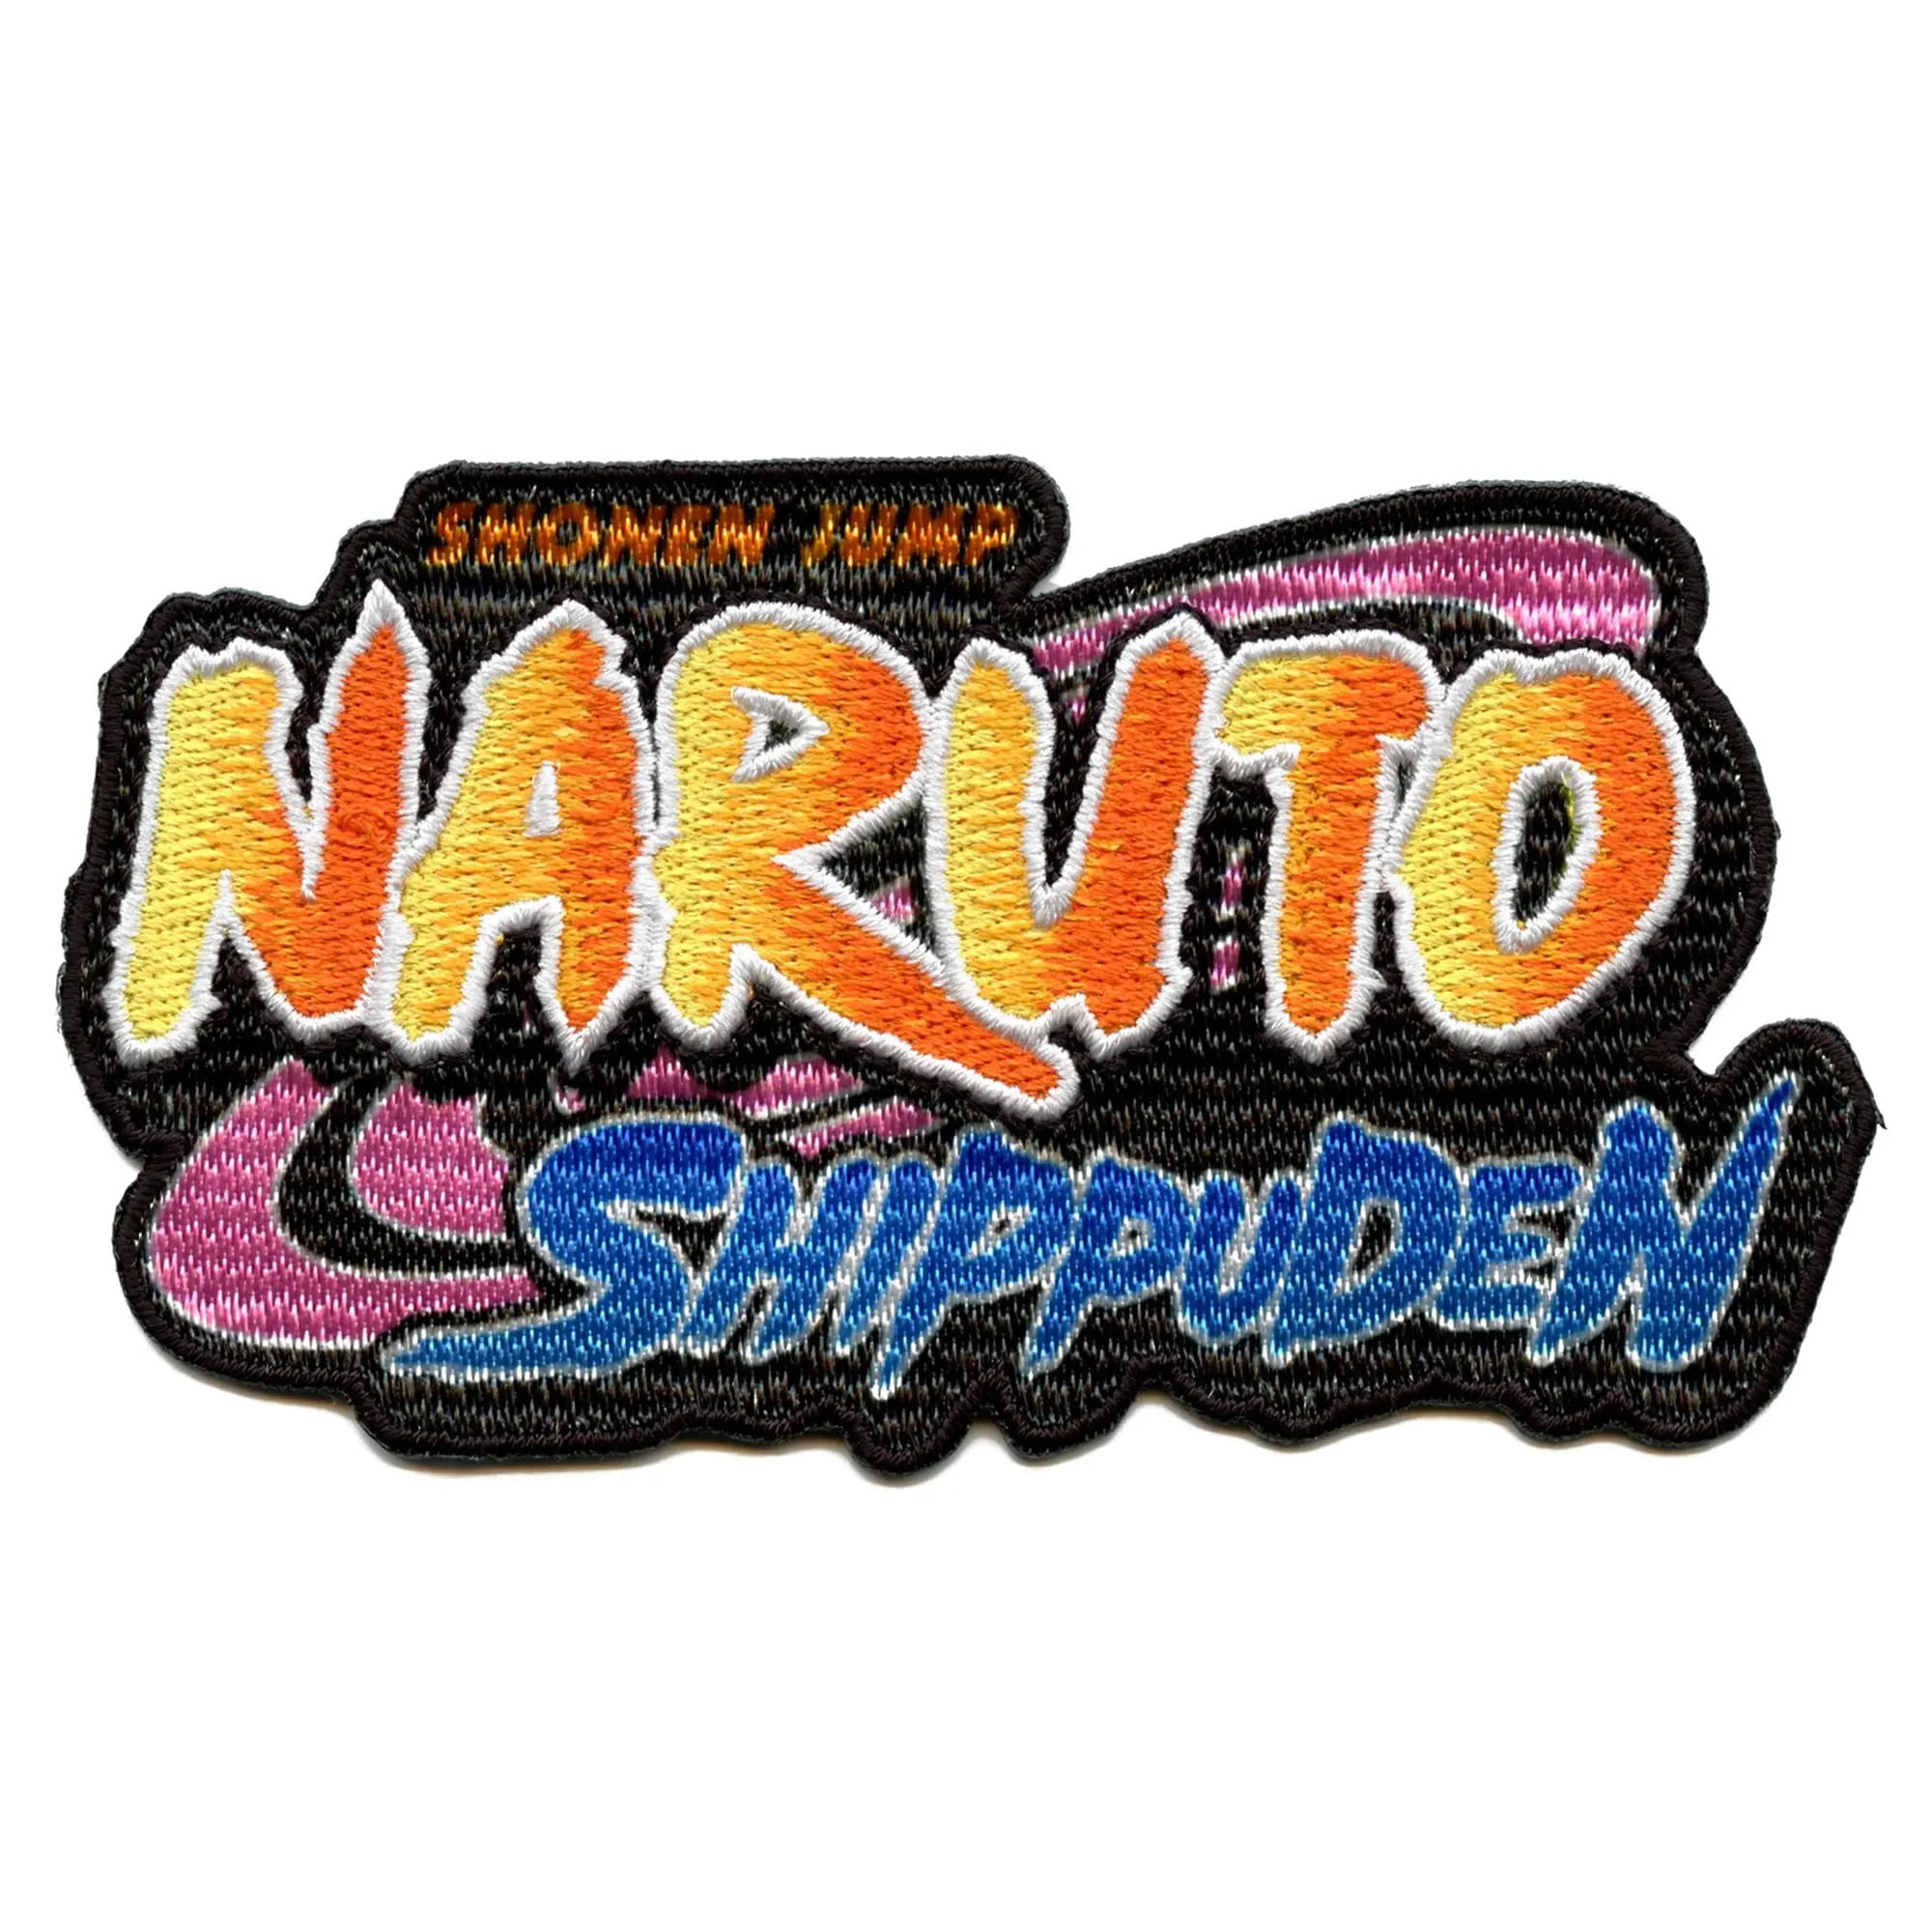 Iron on Patch / Anime Patch Sew on Embroidered Patch Naruto Anime